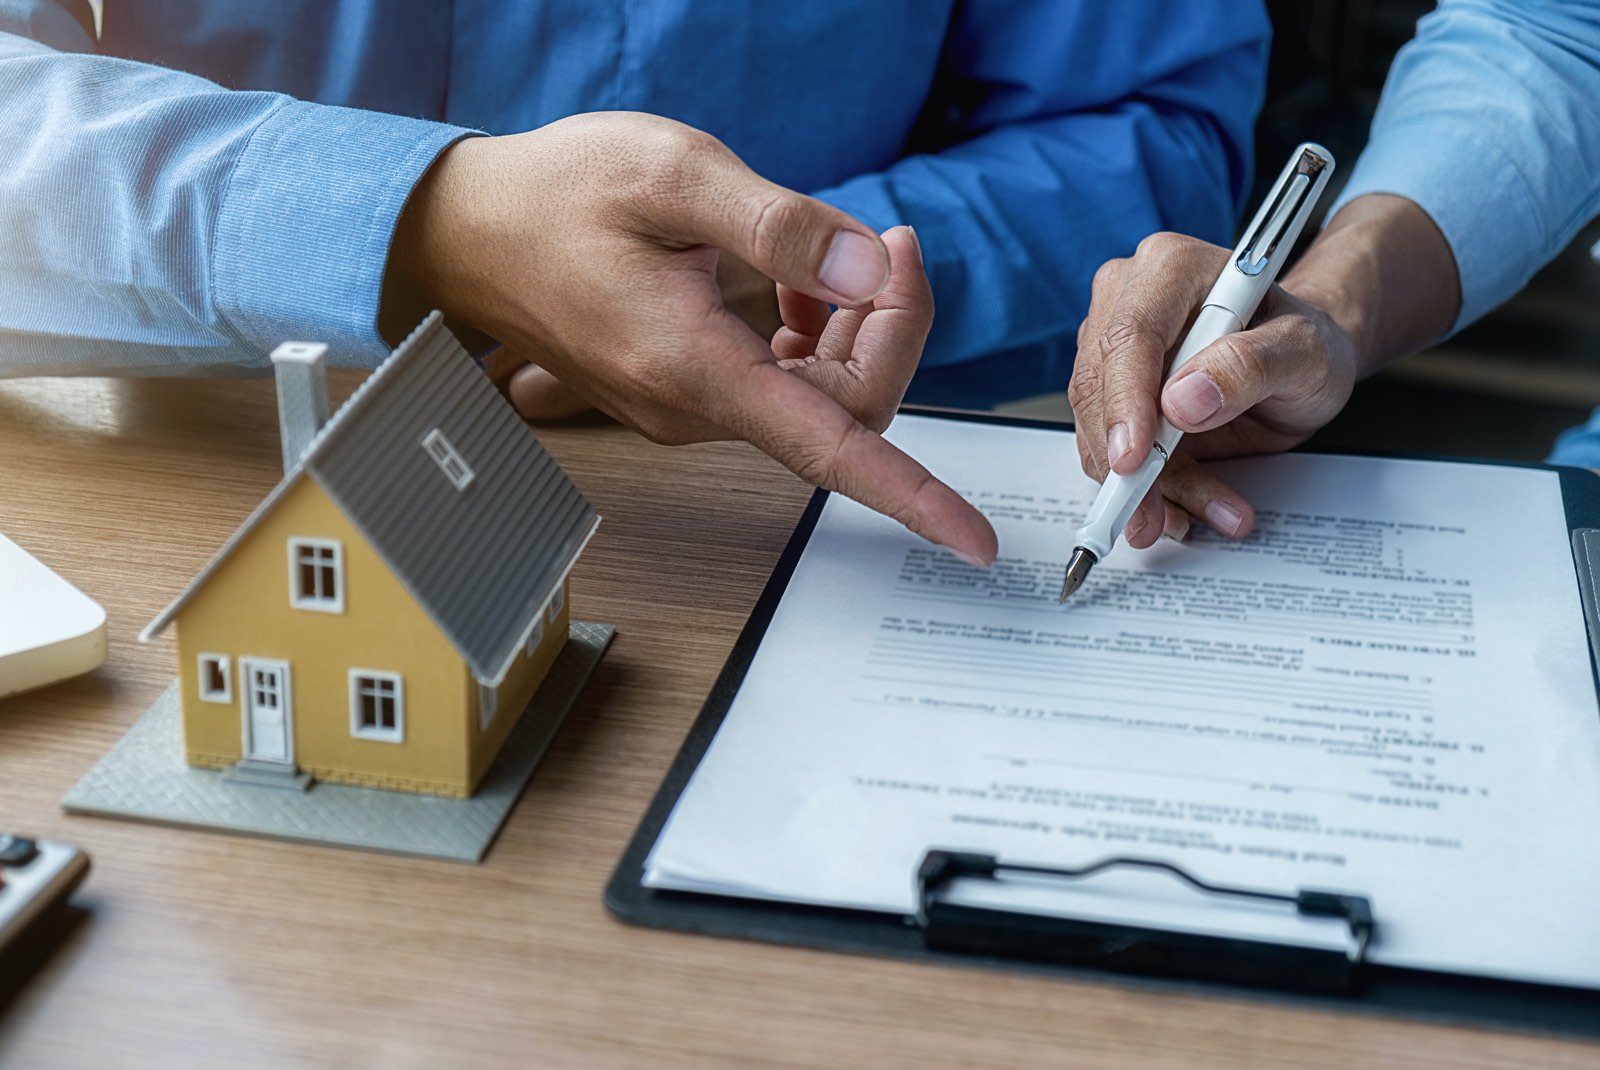 A rent-to-own agreement’s specifics can vary, depending on what the property owner and the prospective buyers negotiate within their agreement.